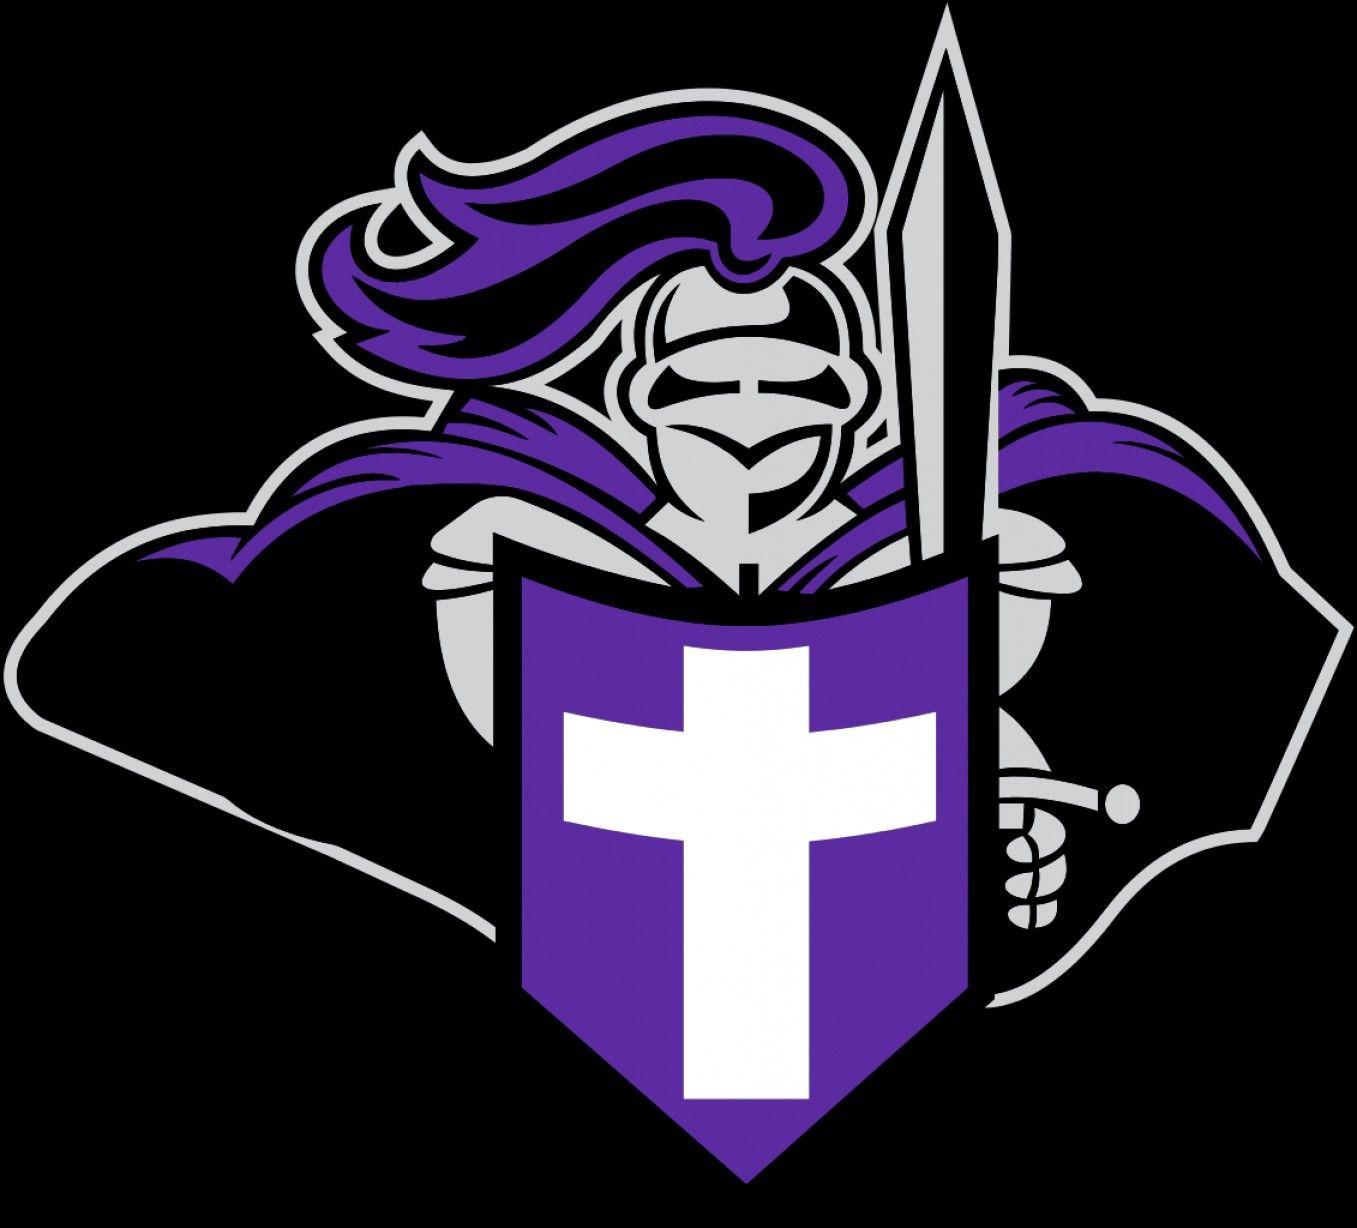 Holy Cross Logo - Best Holy Cross Crusaders Images | SHOPATCLOTH